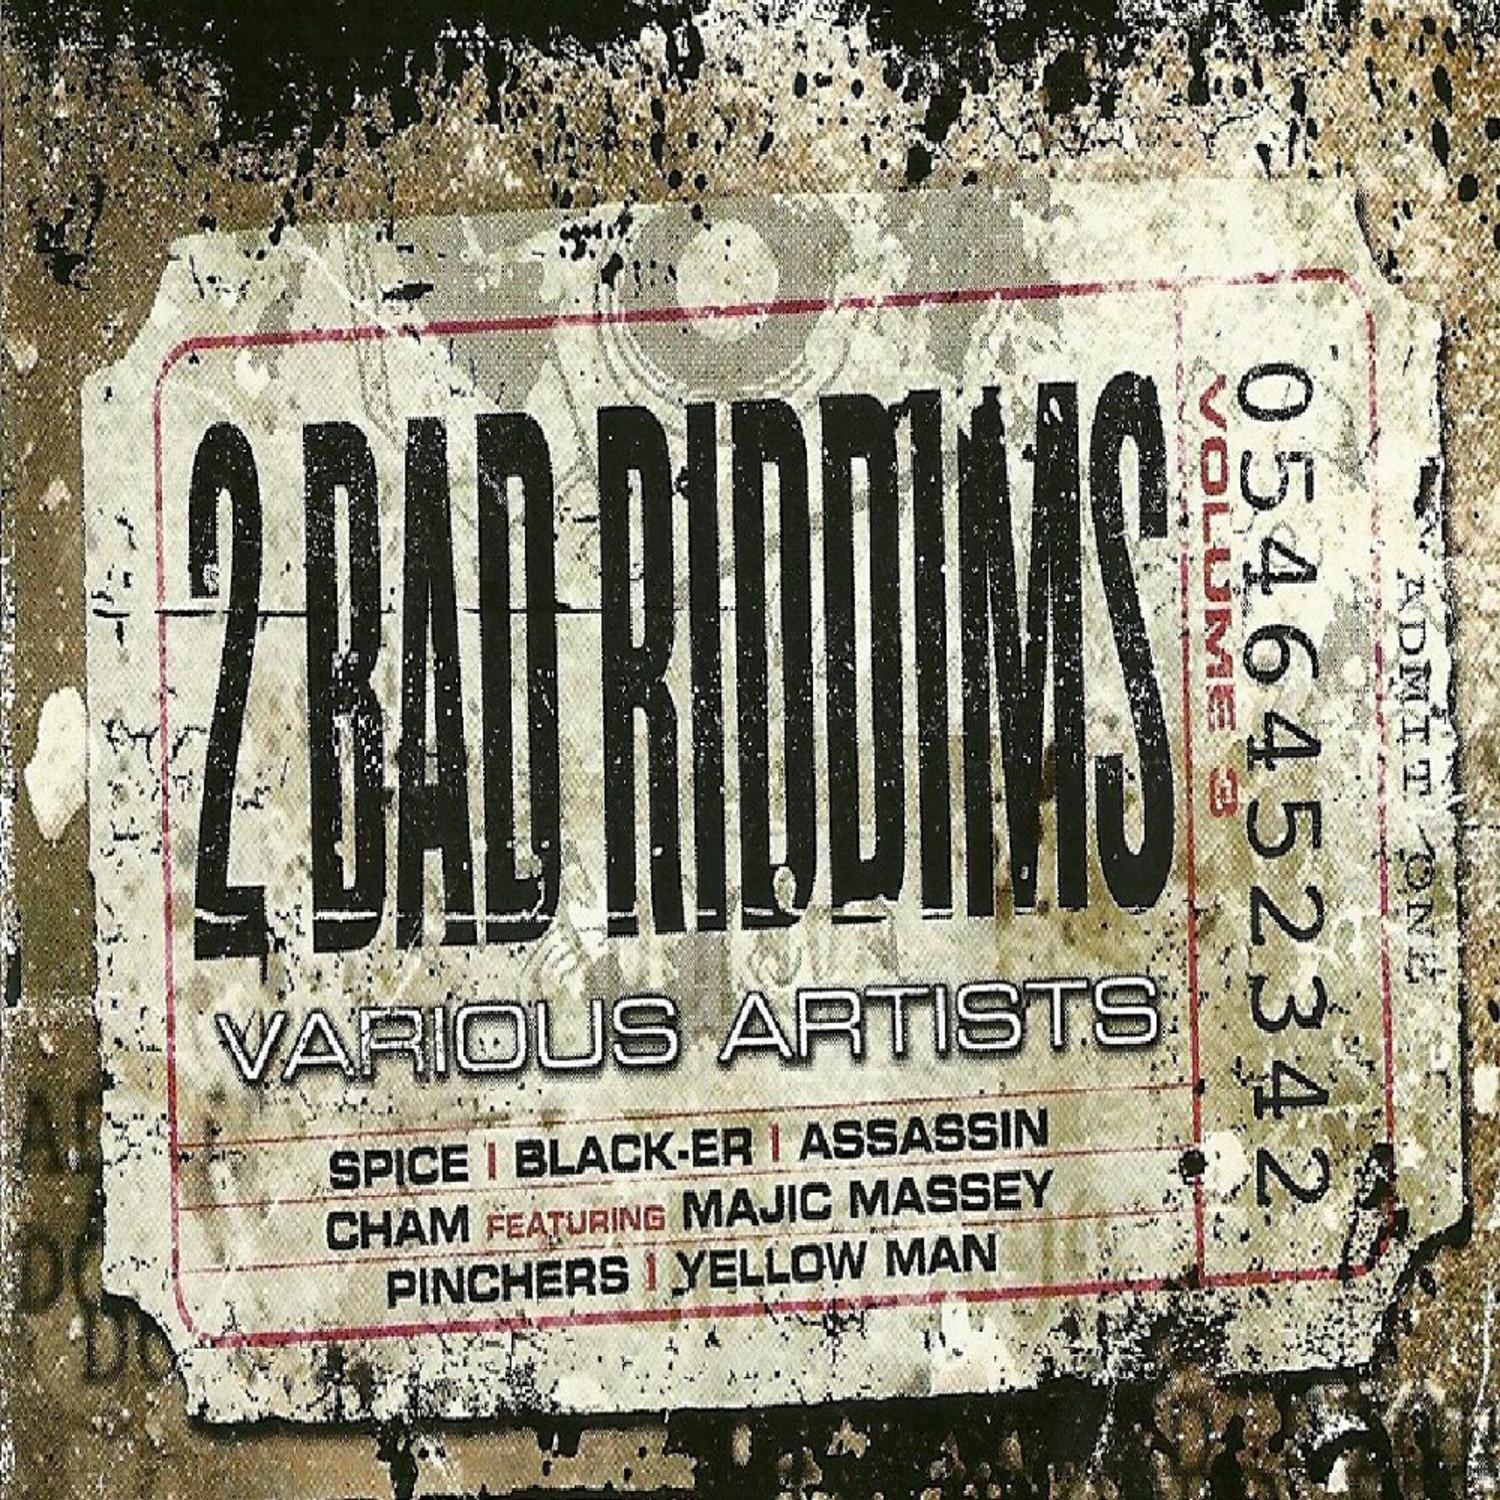 Two Bad Riddims Vol. 3: Eighty Five / Stage Show